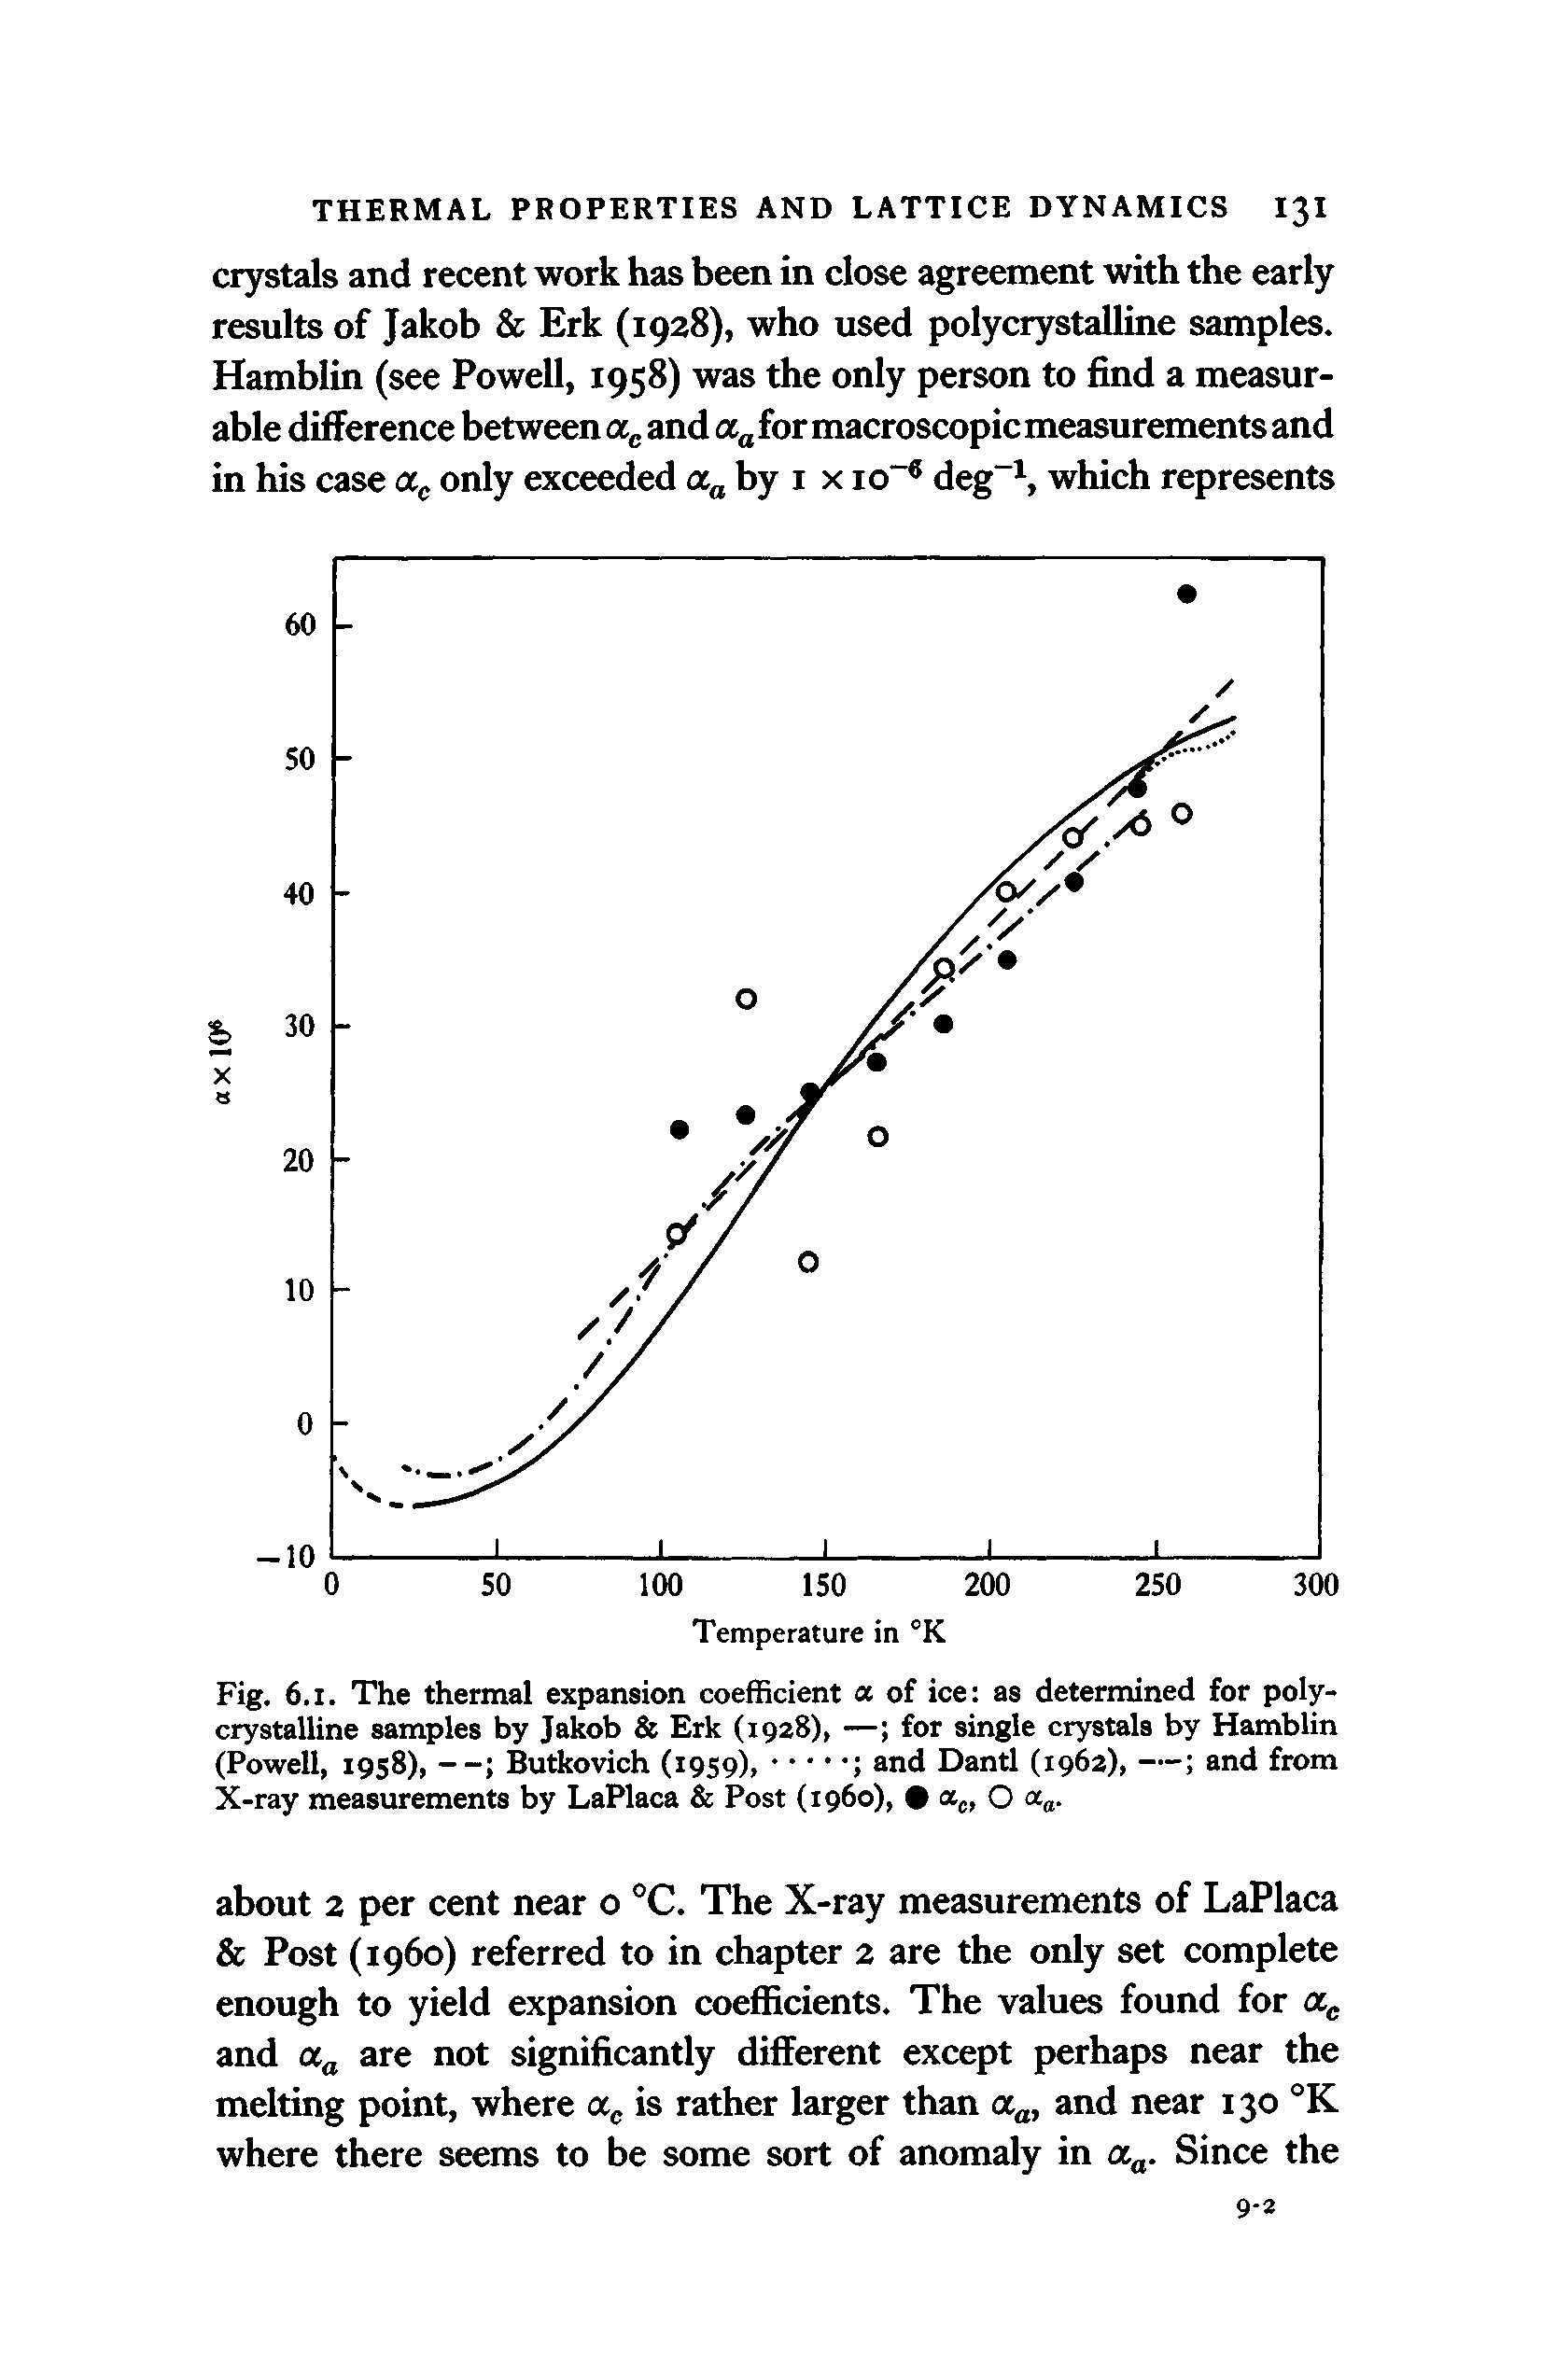 Fig. 6.1. The thermal expansion coefficient a of ice as determined for poly-crystalline samples by Jakob Erk (1928), — for single crystals by Hamblin...